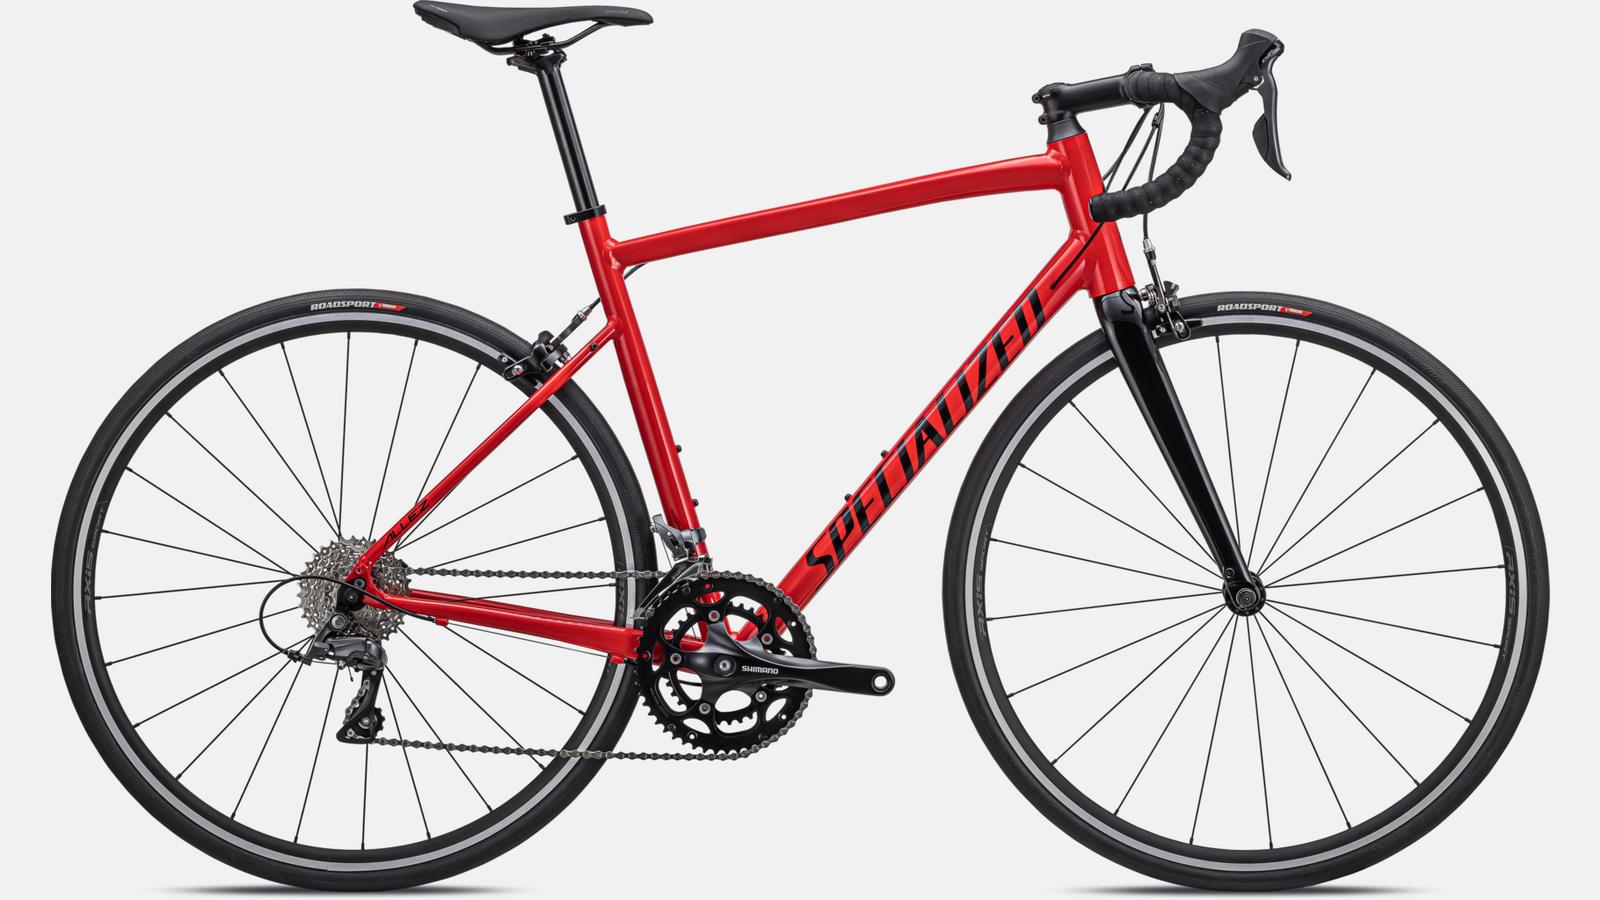 Paint for 2022 Specialized Allez - Gloss Flo Red